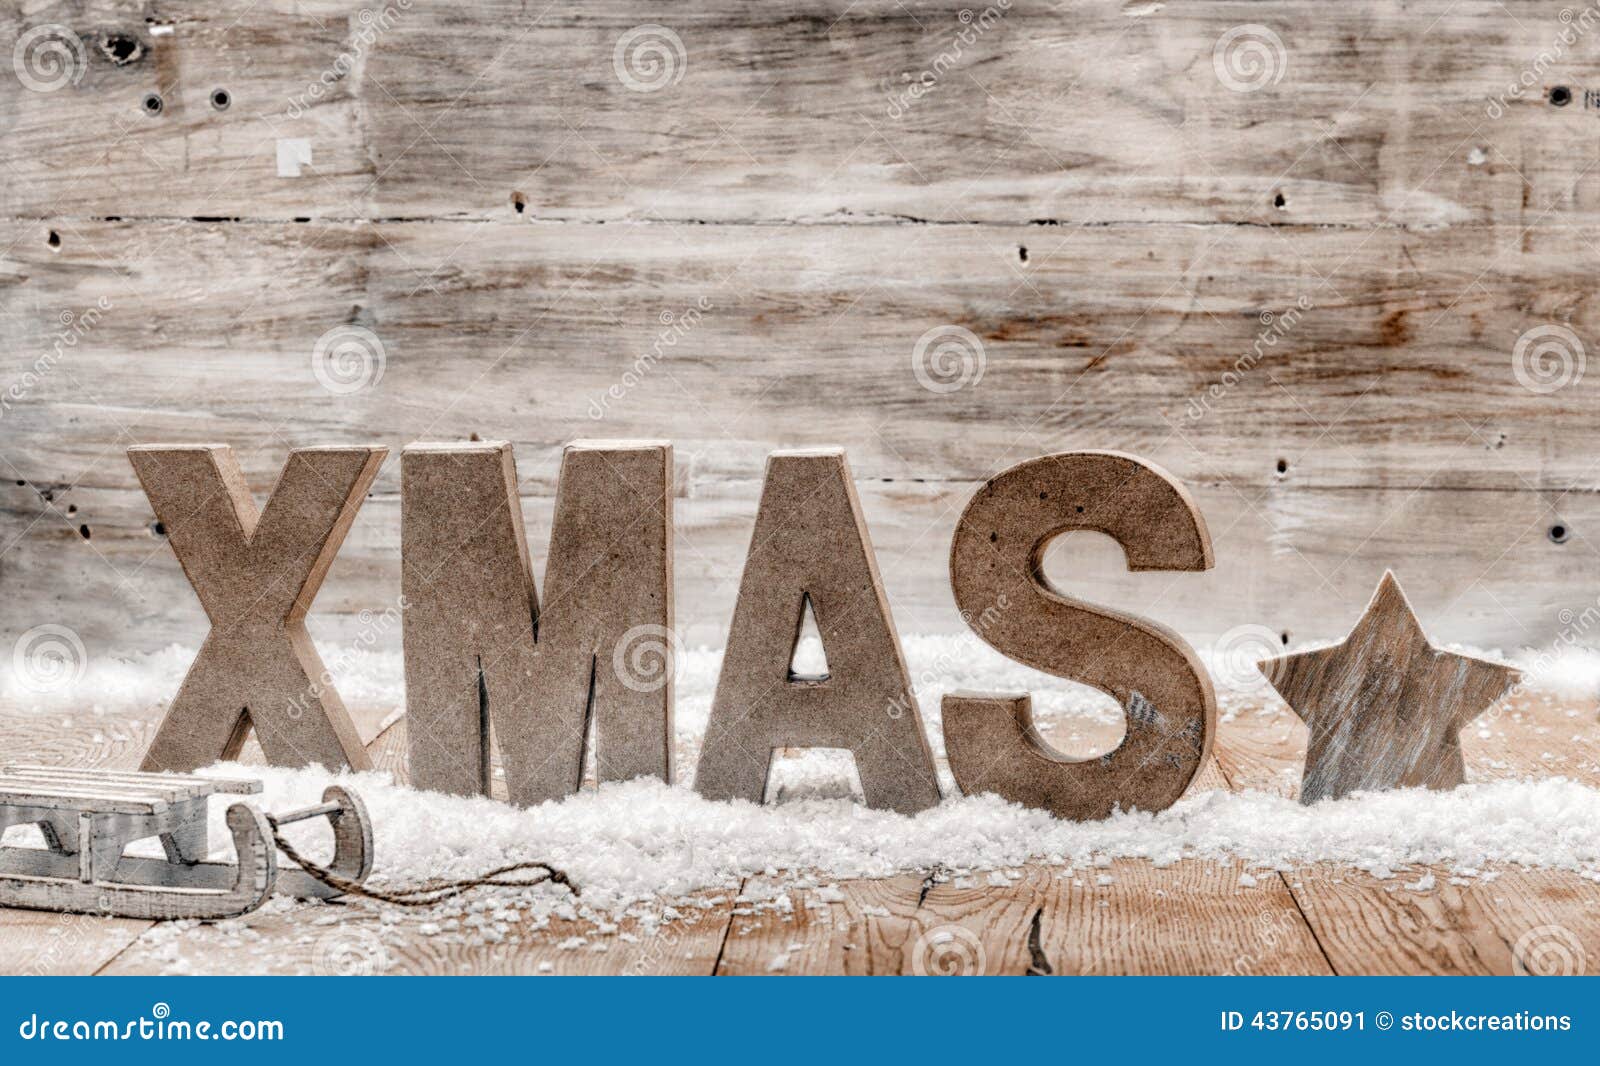 Wood craft rustic Christmas background with wooden letters spelling 